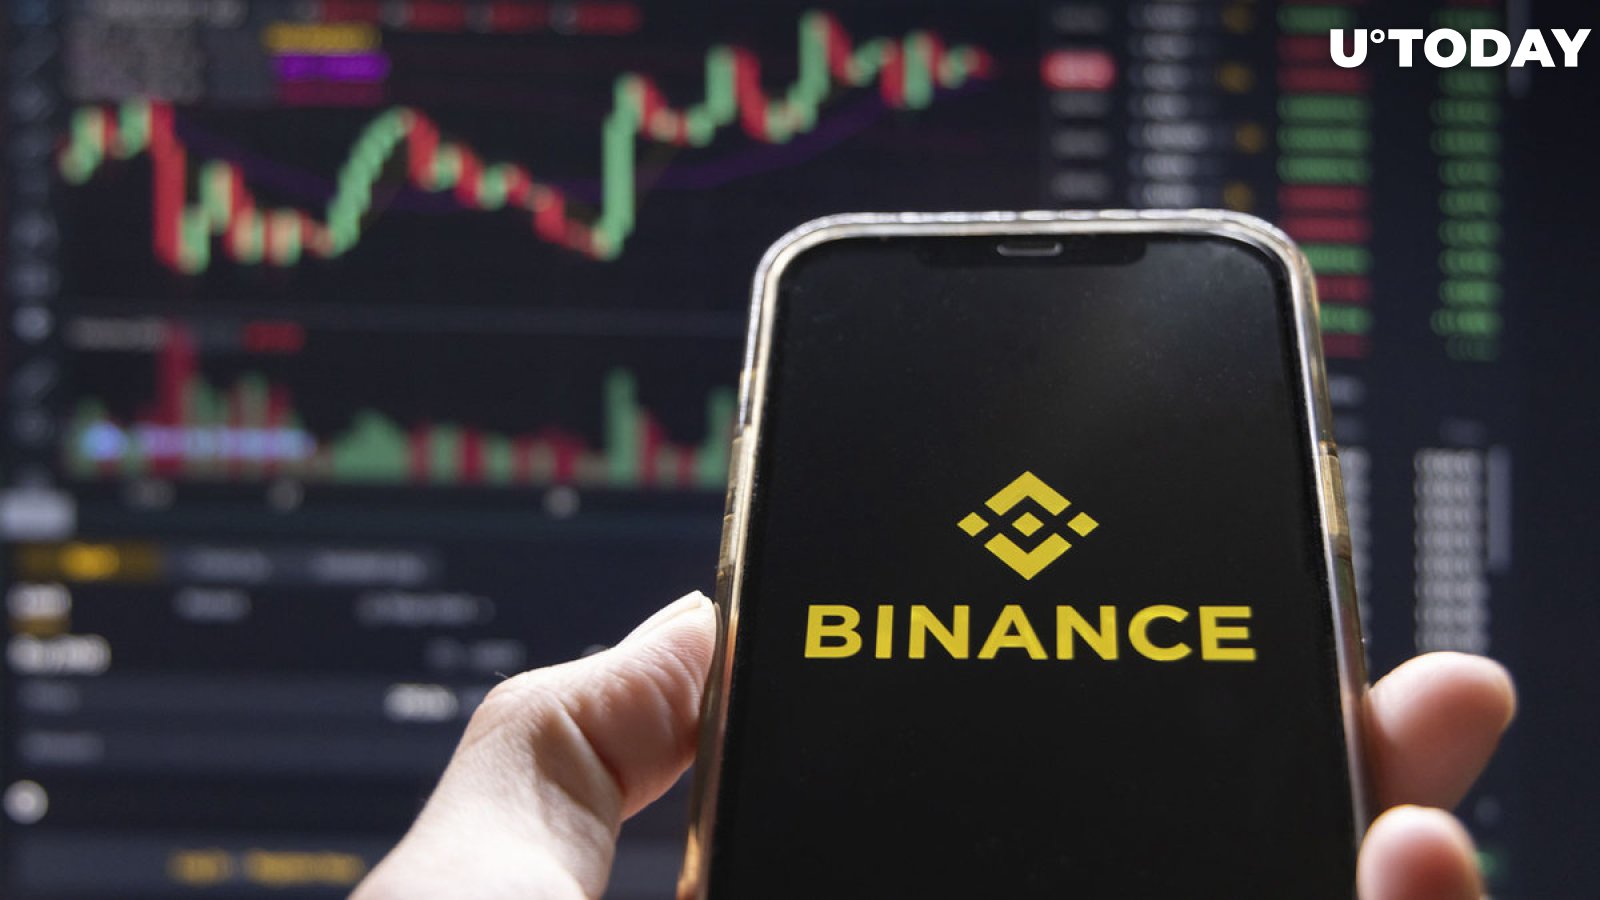 CryptoQuant CEO Analyzed Binance's Holdings, Here's His Conclusion